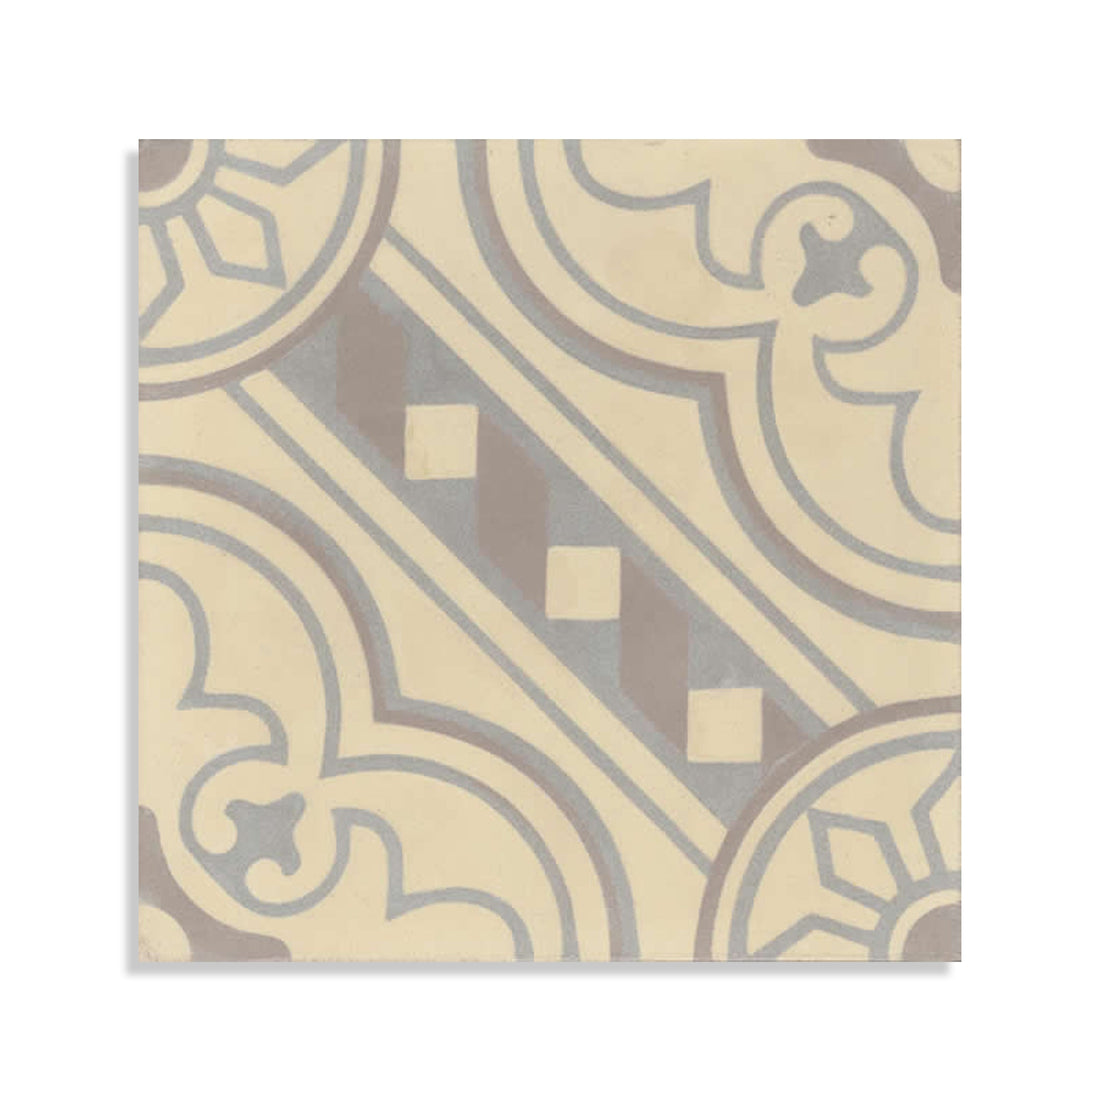 Moroccan Encaustic Cement Pattern gr16, 20 x 20cm - Tiles &amp; Stone To You